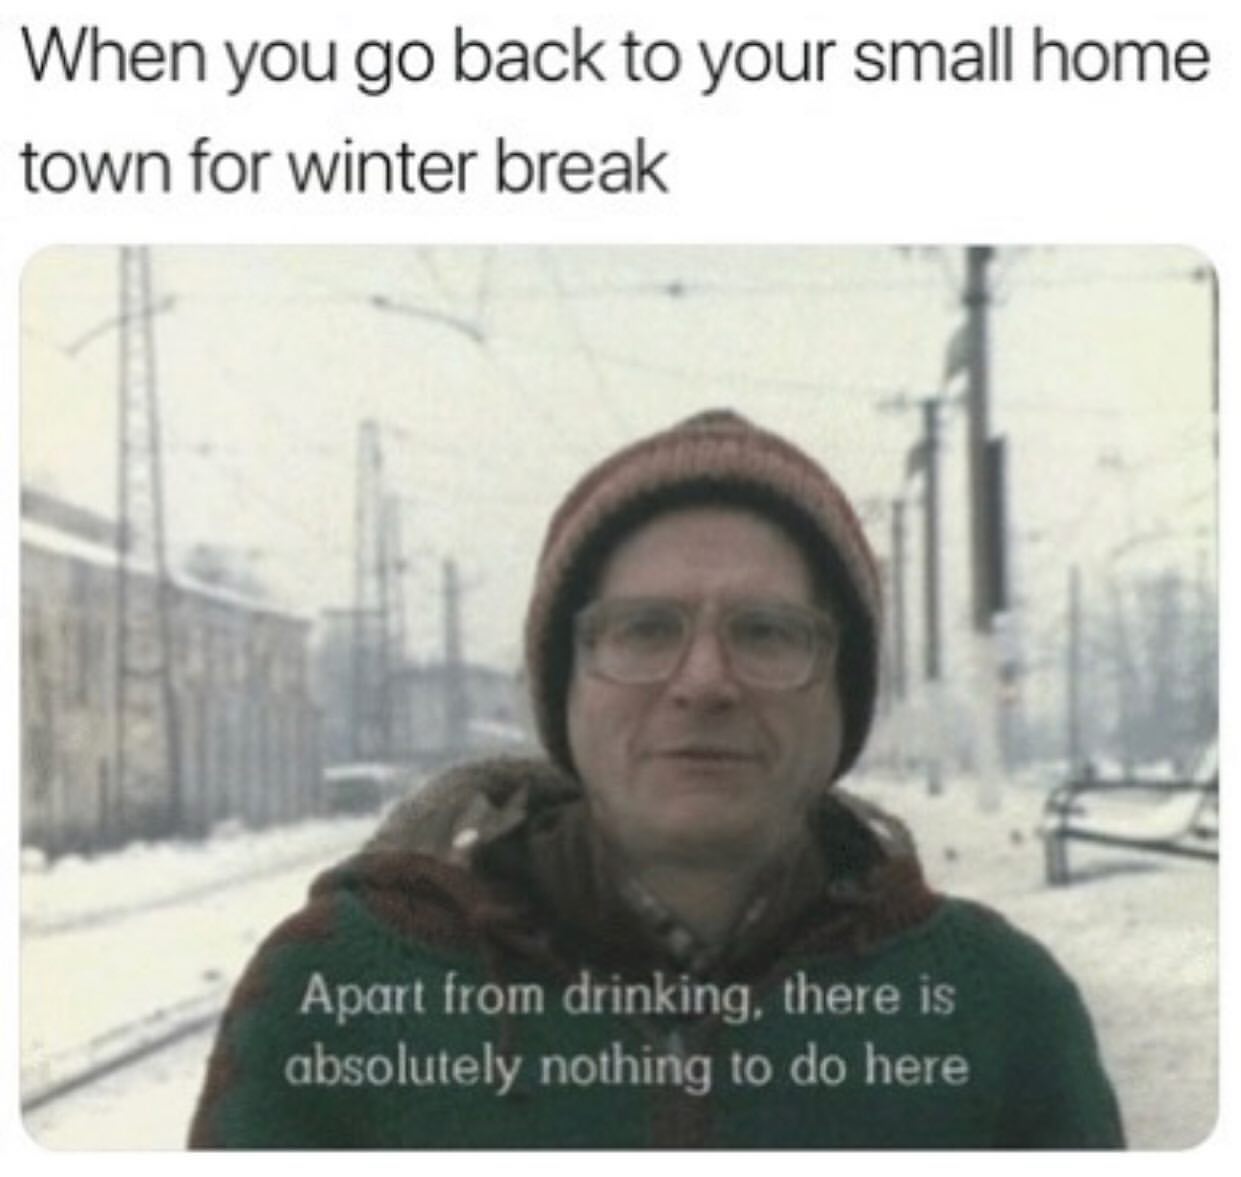 When you go back to your small home town for winter break.  Apart from drinking. There is absolutely nothing to do here.